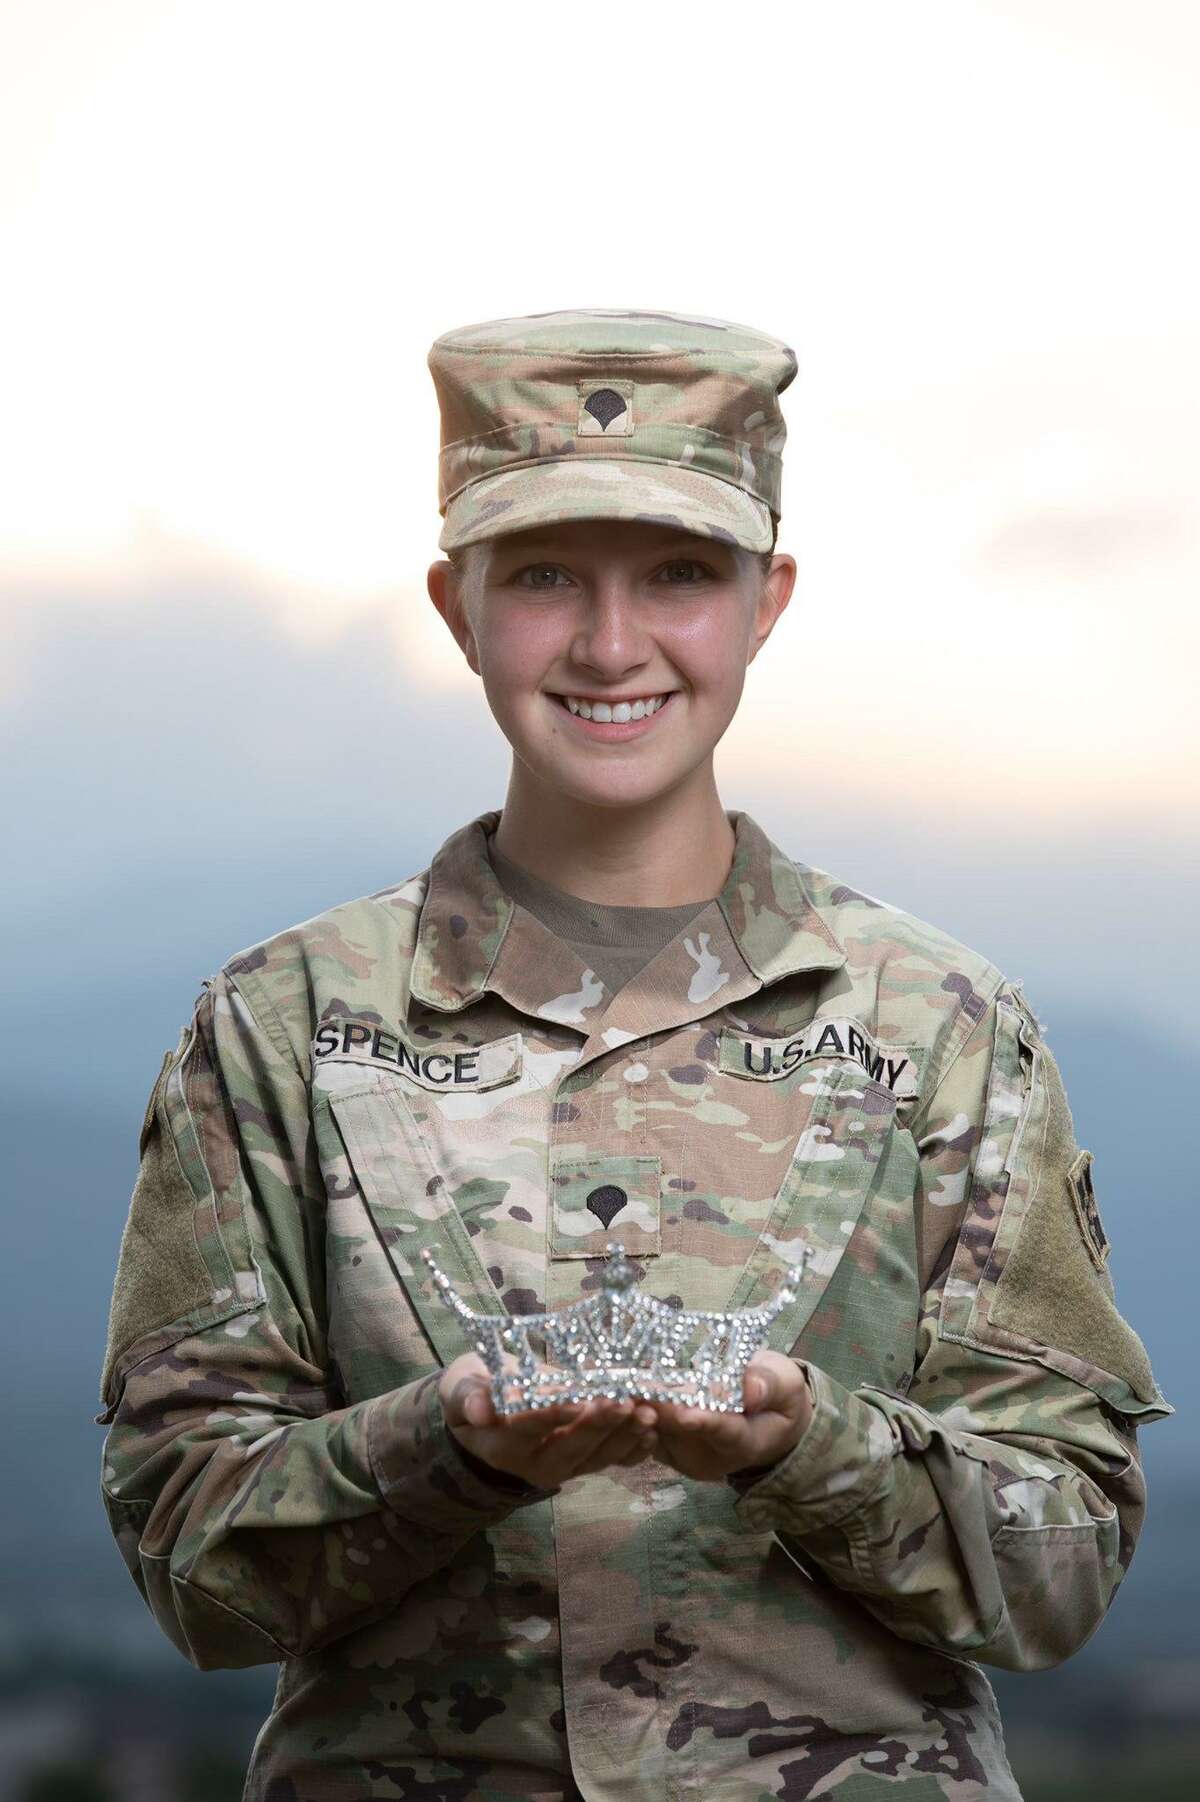 Maura Spence-Carroll, 21, a soldier whose family lives in the Bay Area, will compete Dec. 12-16 for the crown of Miss America and a $100,000 scholarship. This past June, Spence-Carroll won a $7,500 scholarship and the title of Miss Colorado.